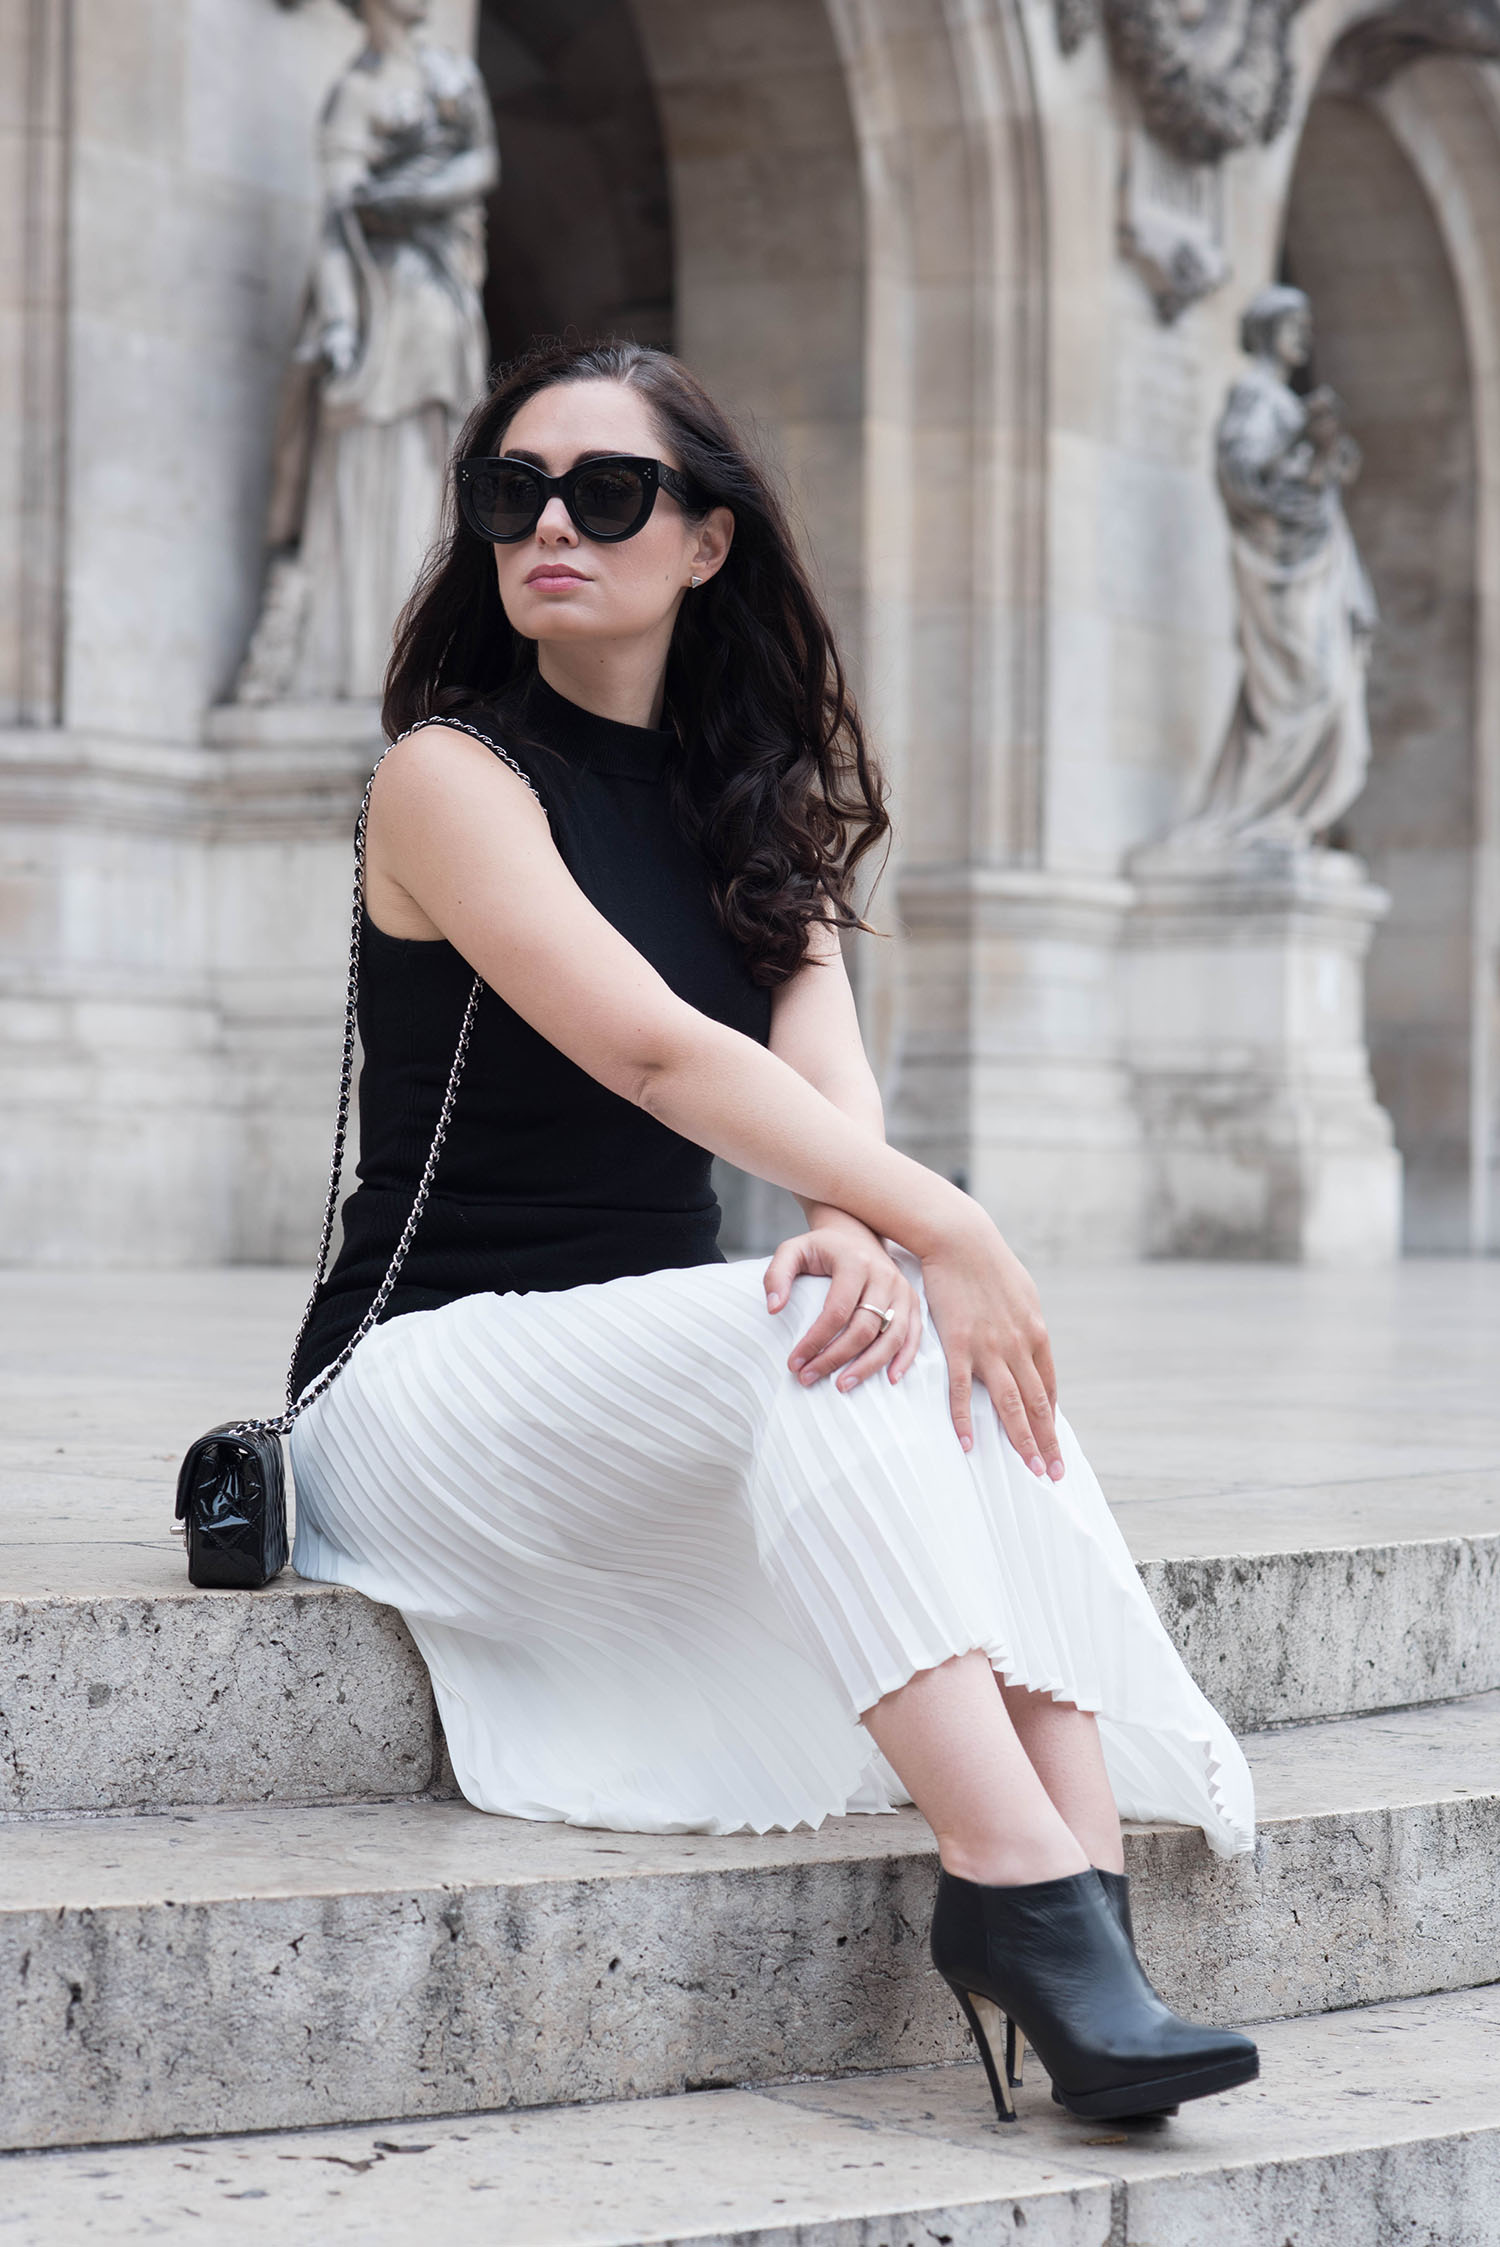 Winnipeg fashion blogger Cee Fardoe of Coco & Vera sits on the stairs of the Opera Garner in Paris, wearing an Aritzia pleated skirt, Celine Audrey sunglasses and a Chanel 2.55 handbag